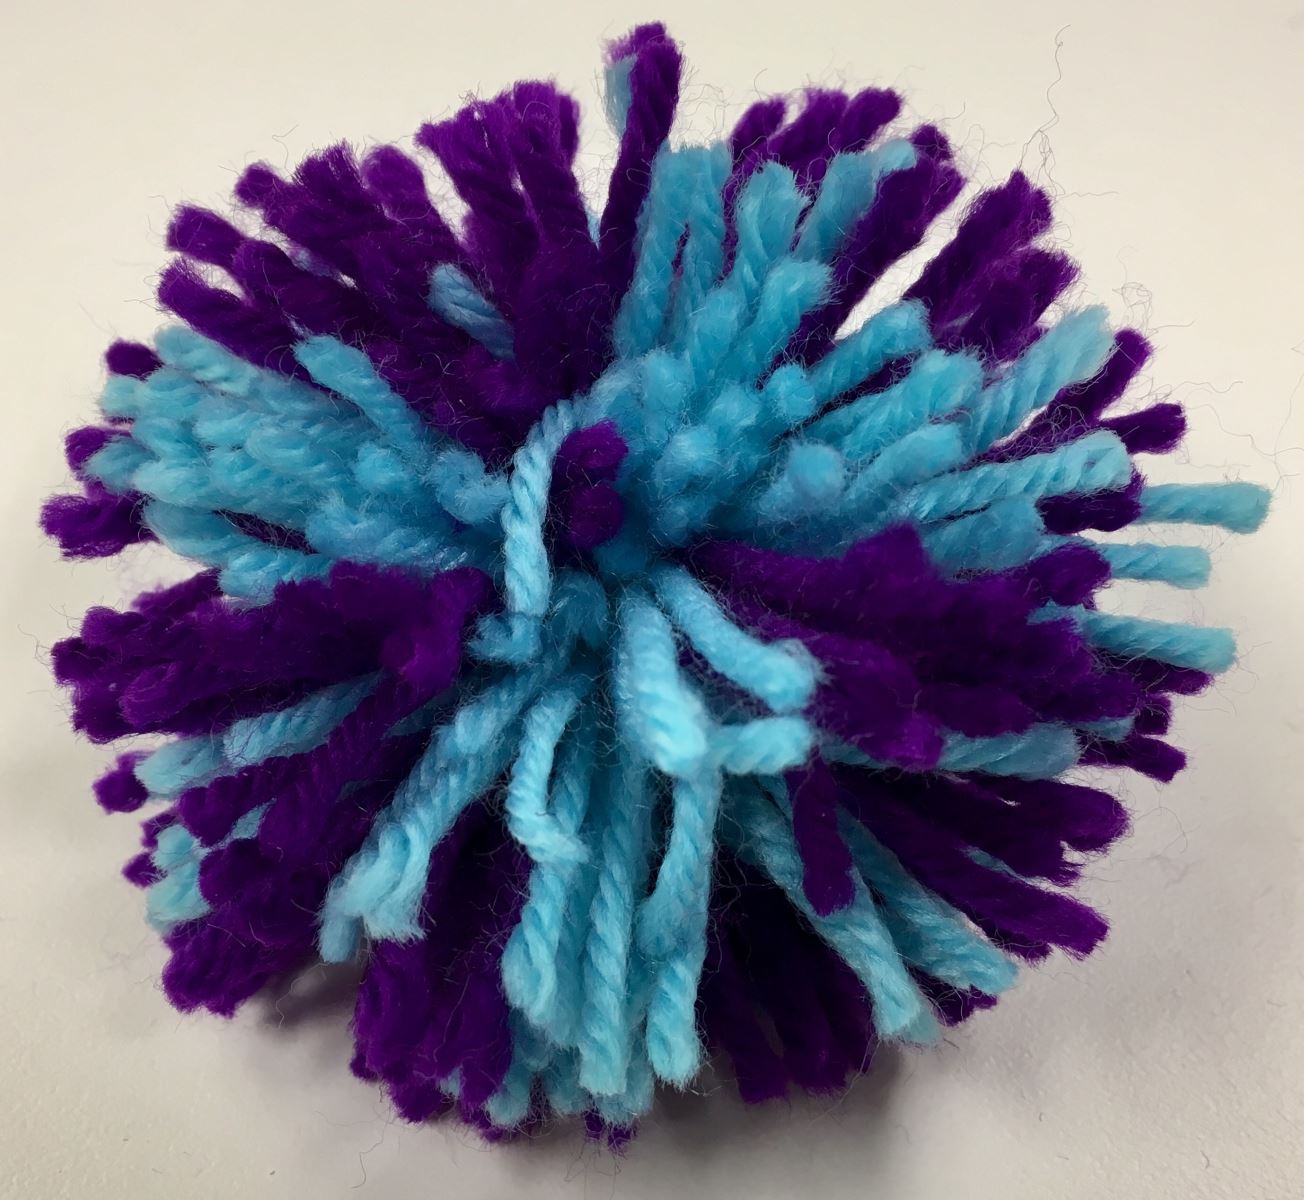 How to Make a Pom pom  Woolen Ball Making 